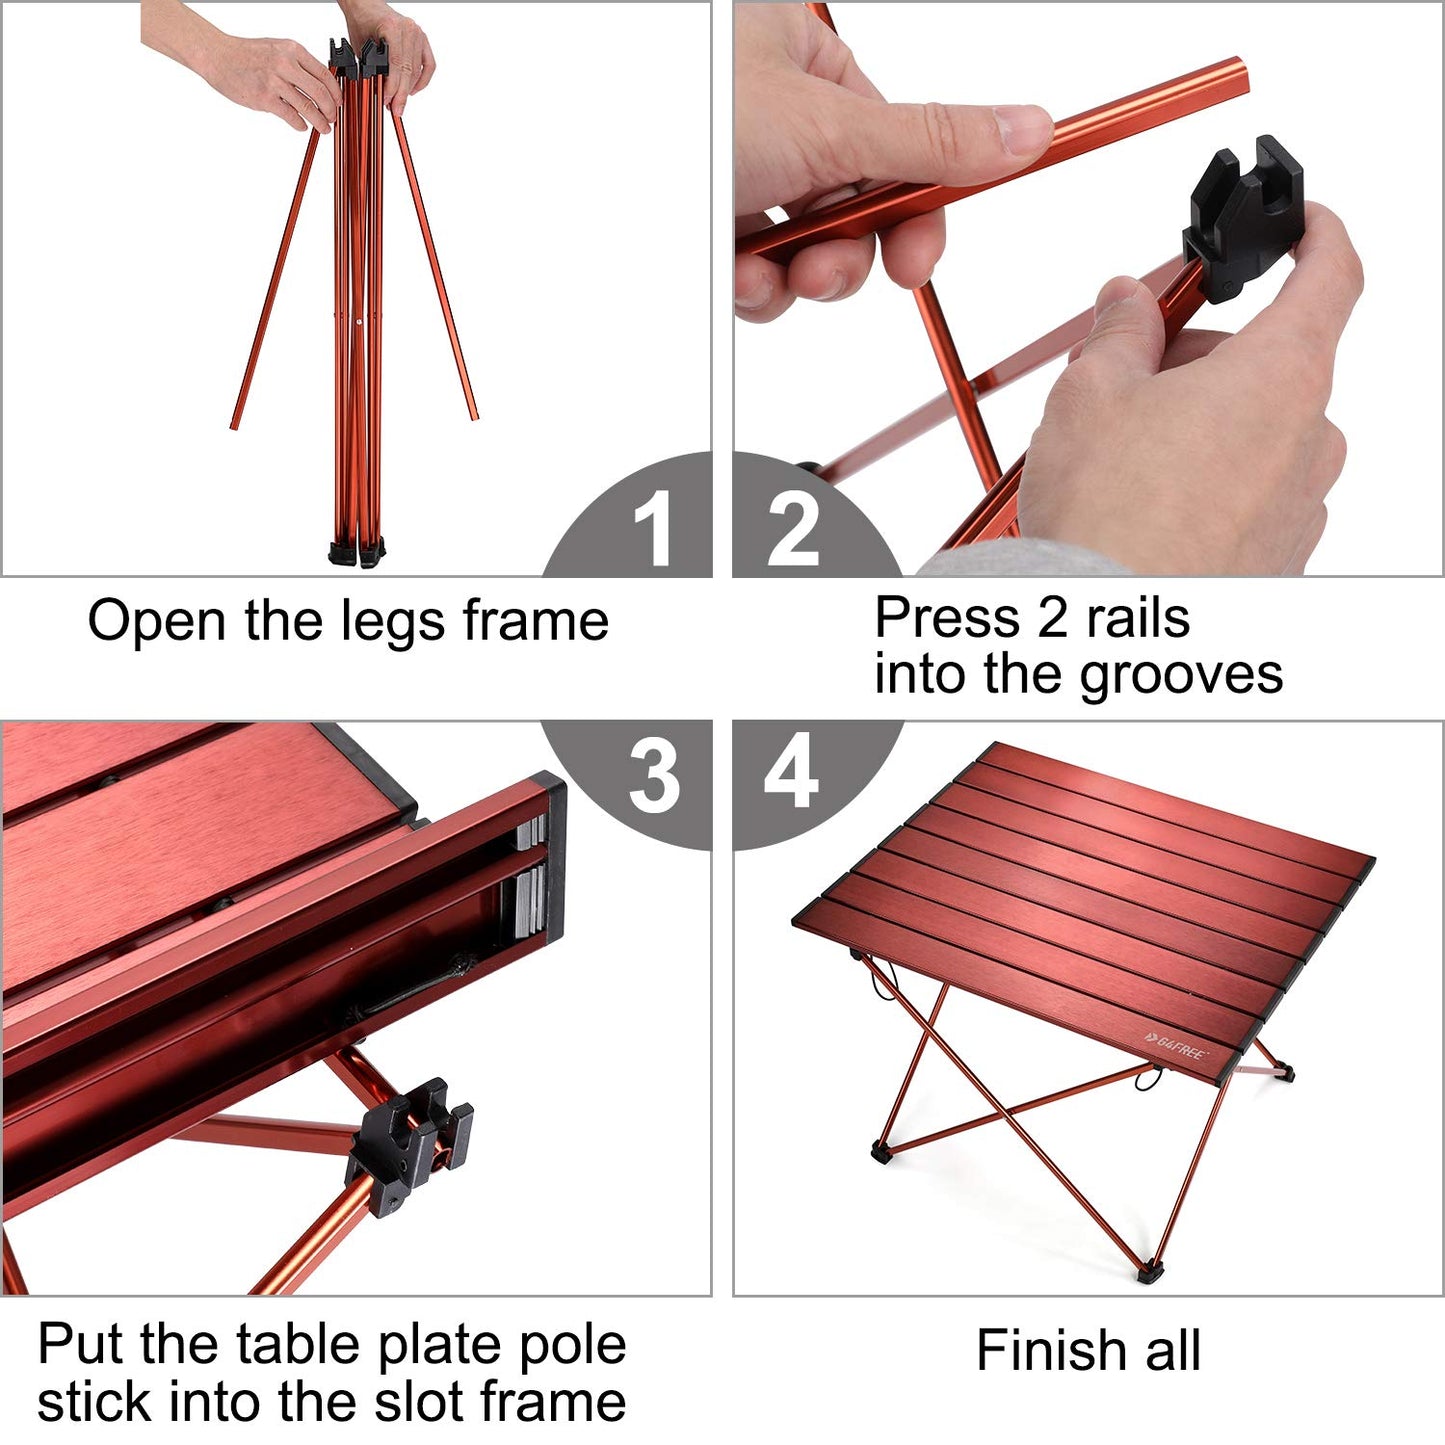 G4Free Portable Camping Table Folding Ultralight Camp Table